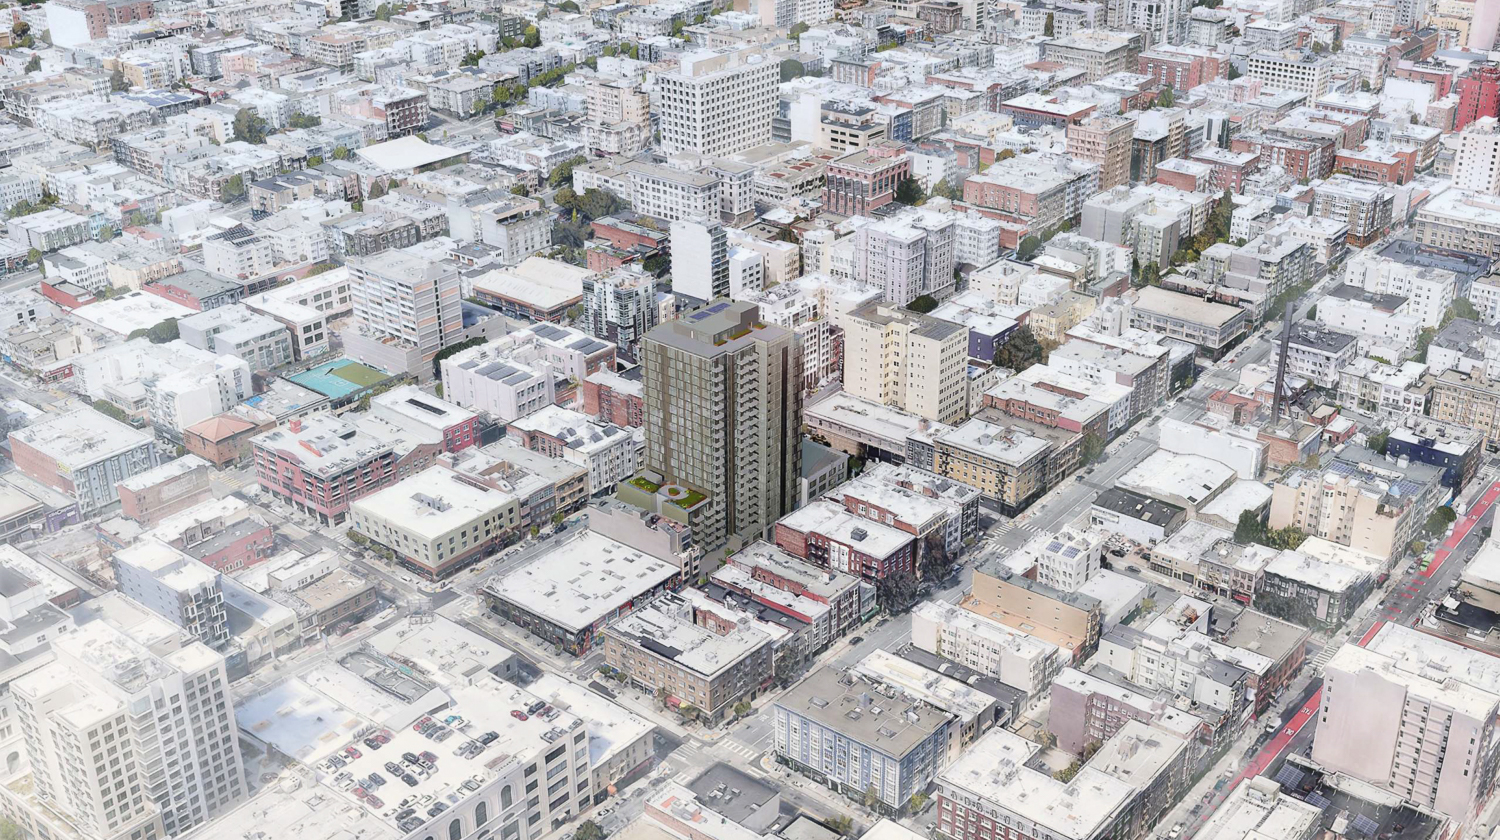 1101-1123 Sutter Street southwest aerial view, rendering by David Baker Architects